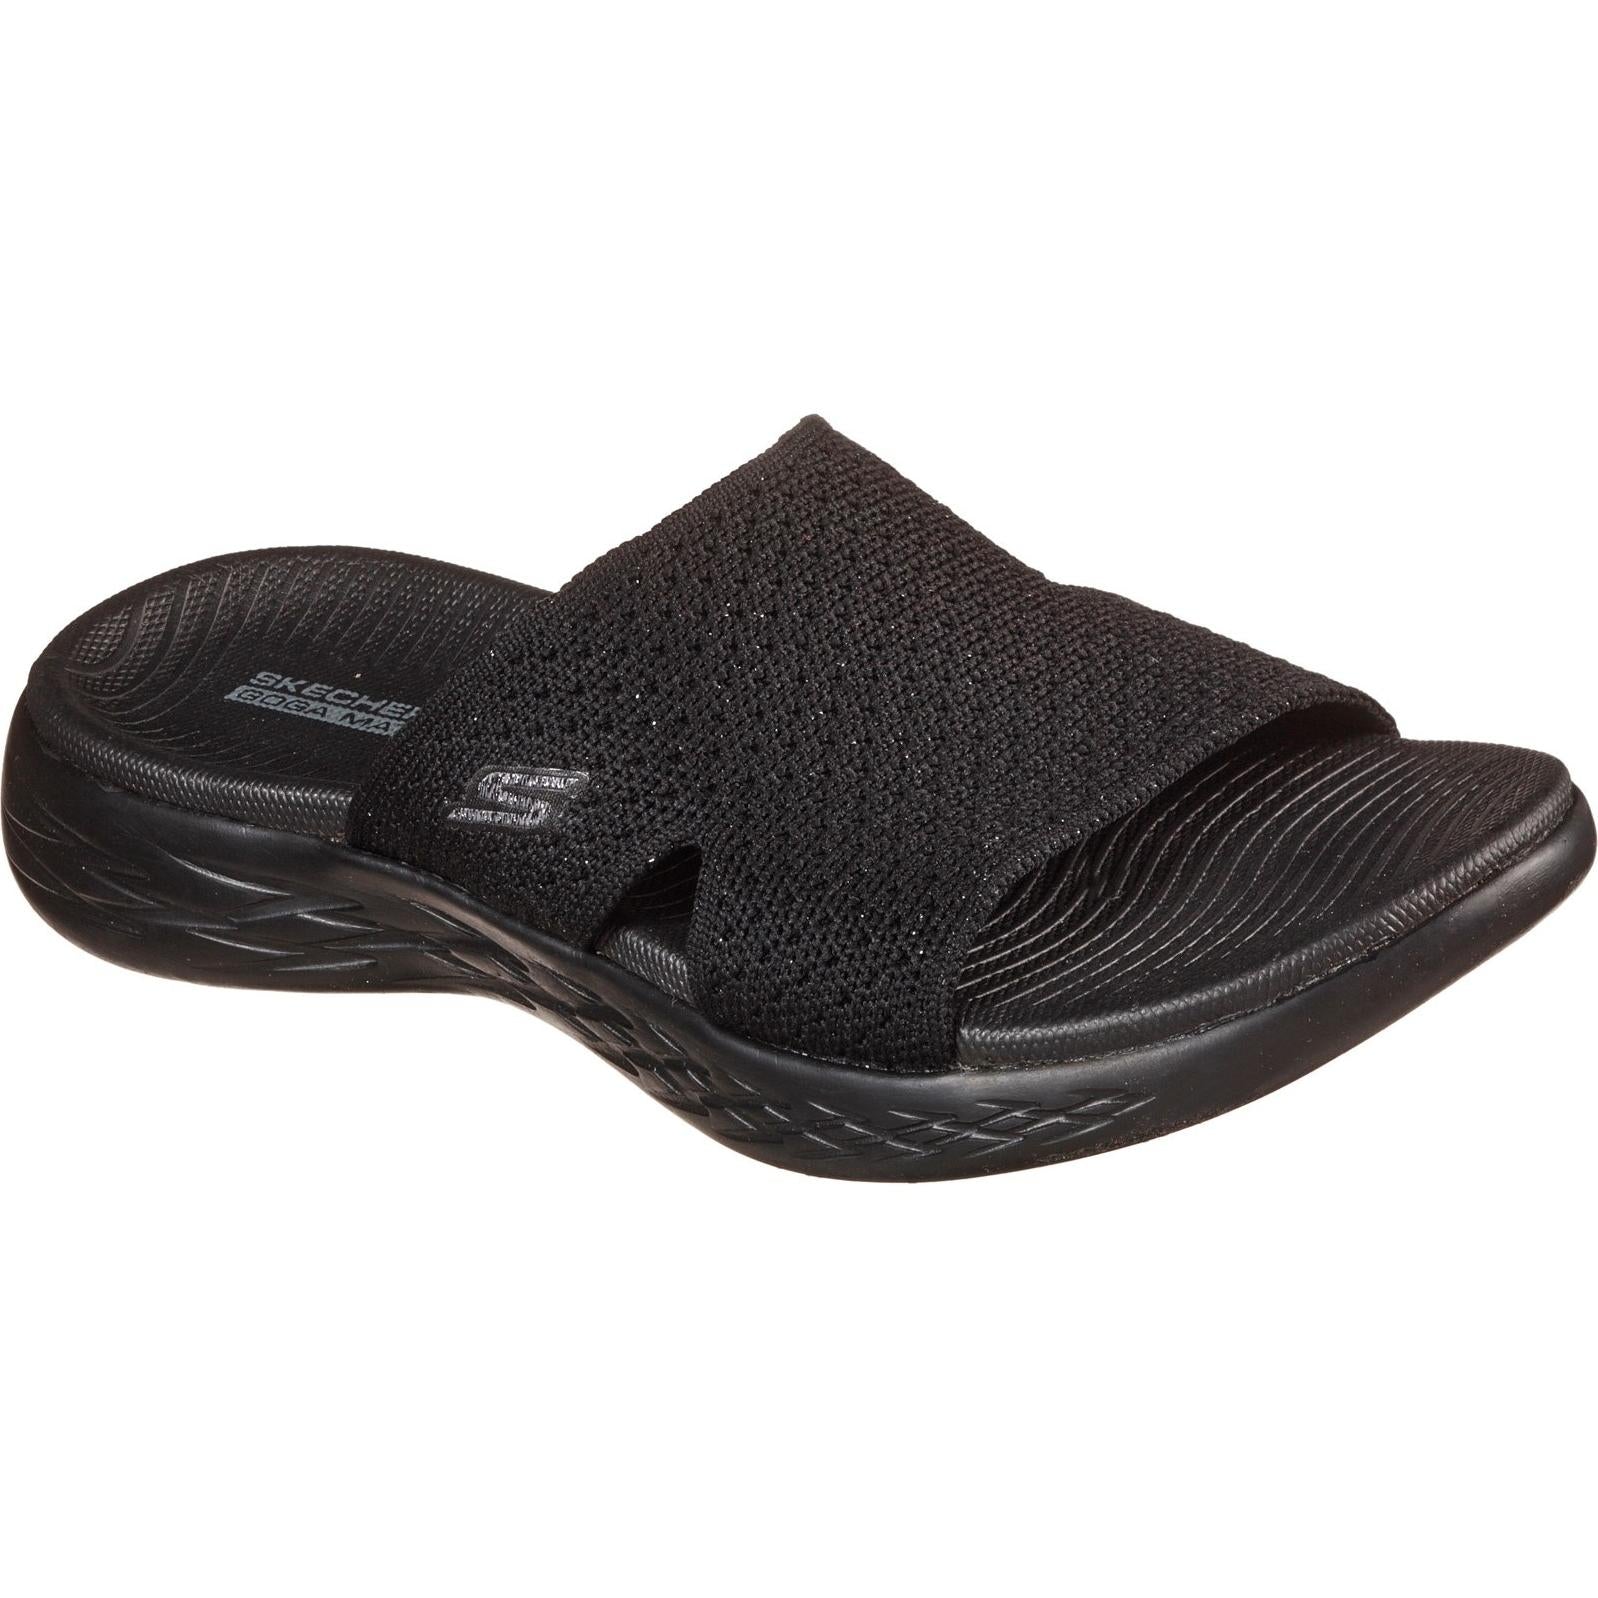 Skechers On-The-Go 600 Adore Mule Sandals